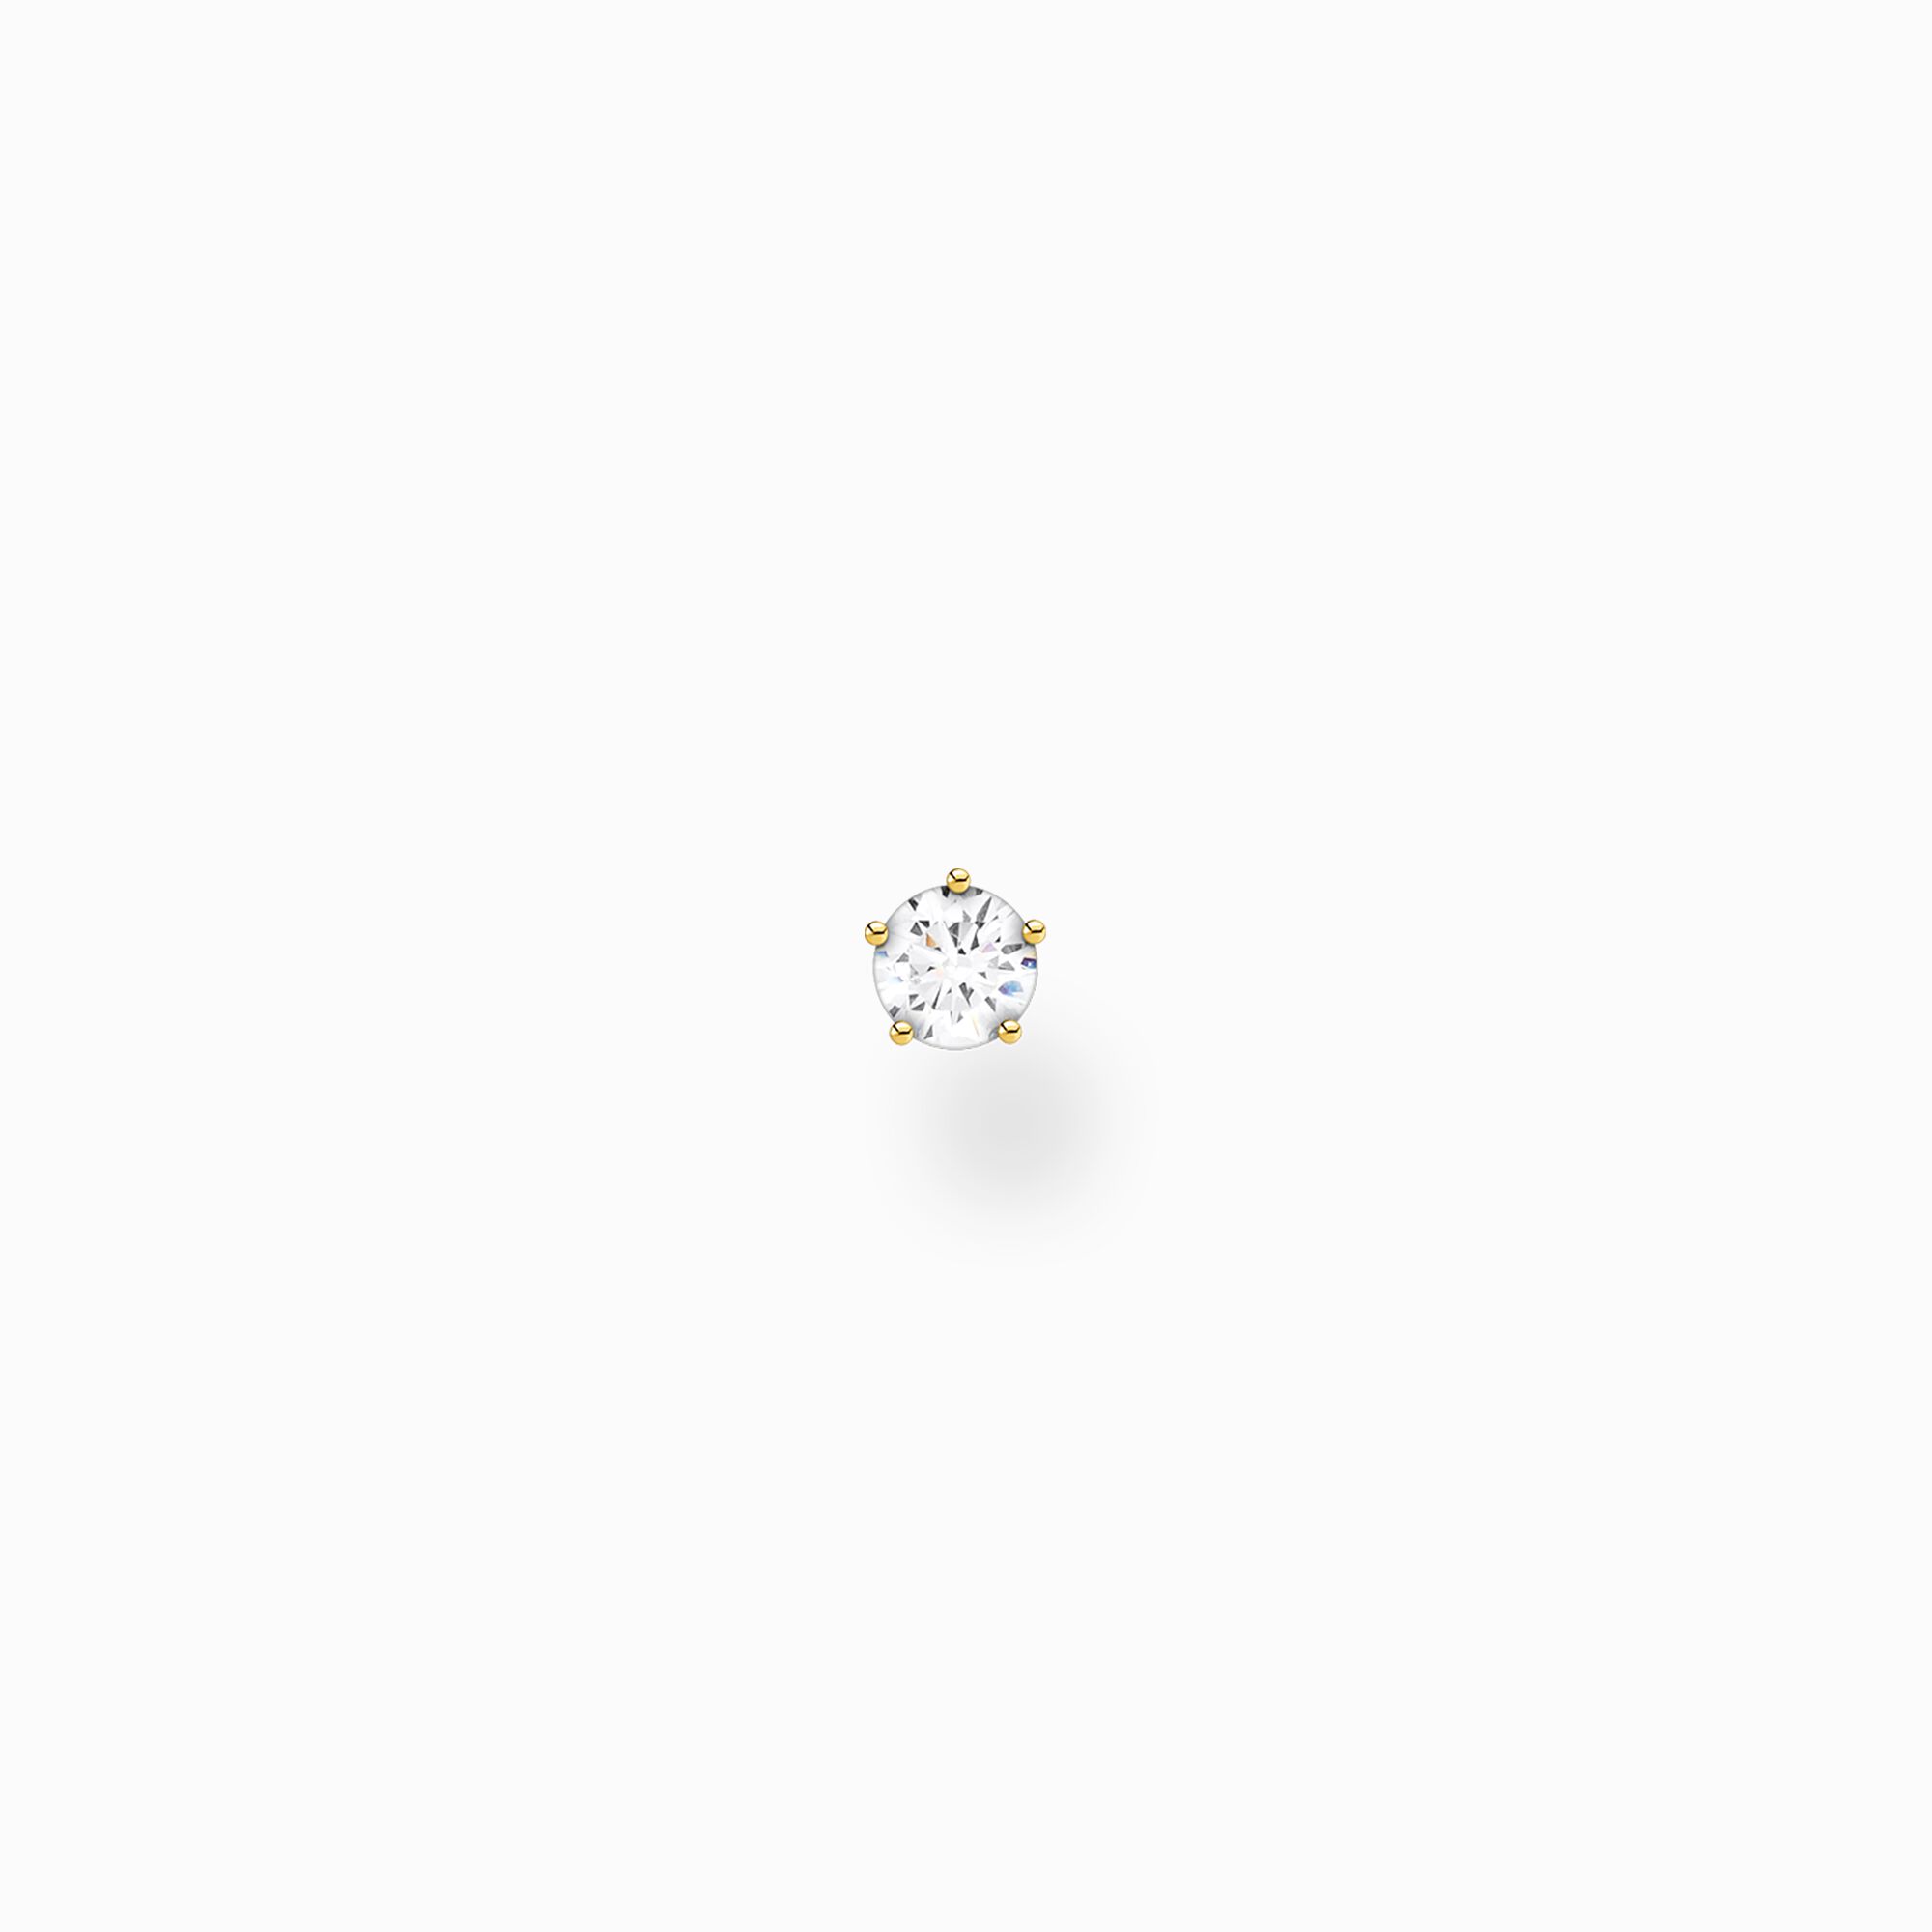 Single ear stud white stone small gold from the Charming Collection collection in the THOMAS SABO online store